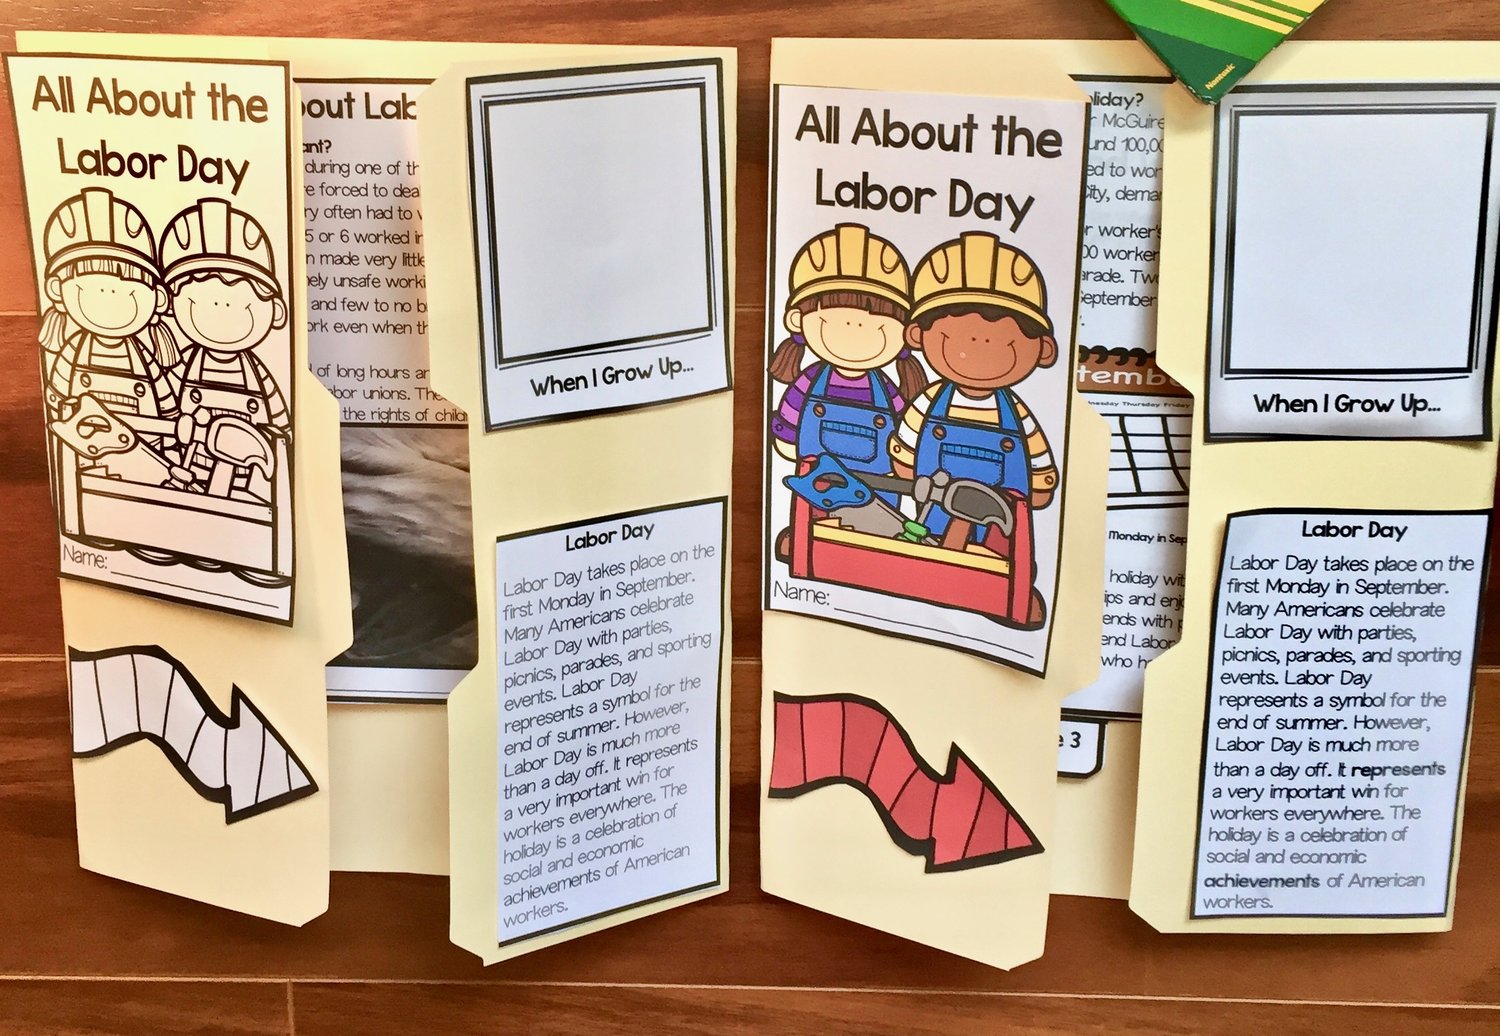 How+to+Create+a+Labor+Day+Activity+for+Kids+%23labordayactivity+%23labordaycraft+%23labordaylapbook?format=1500w